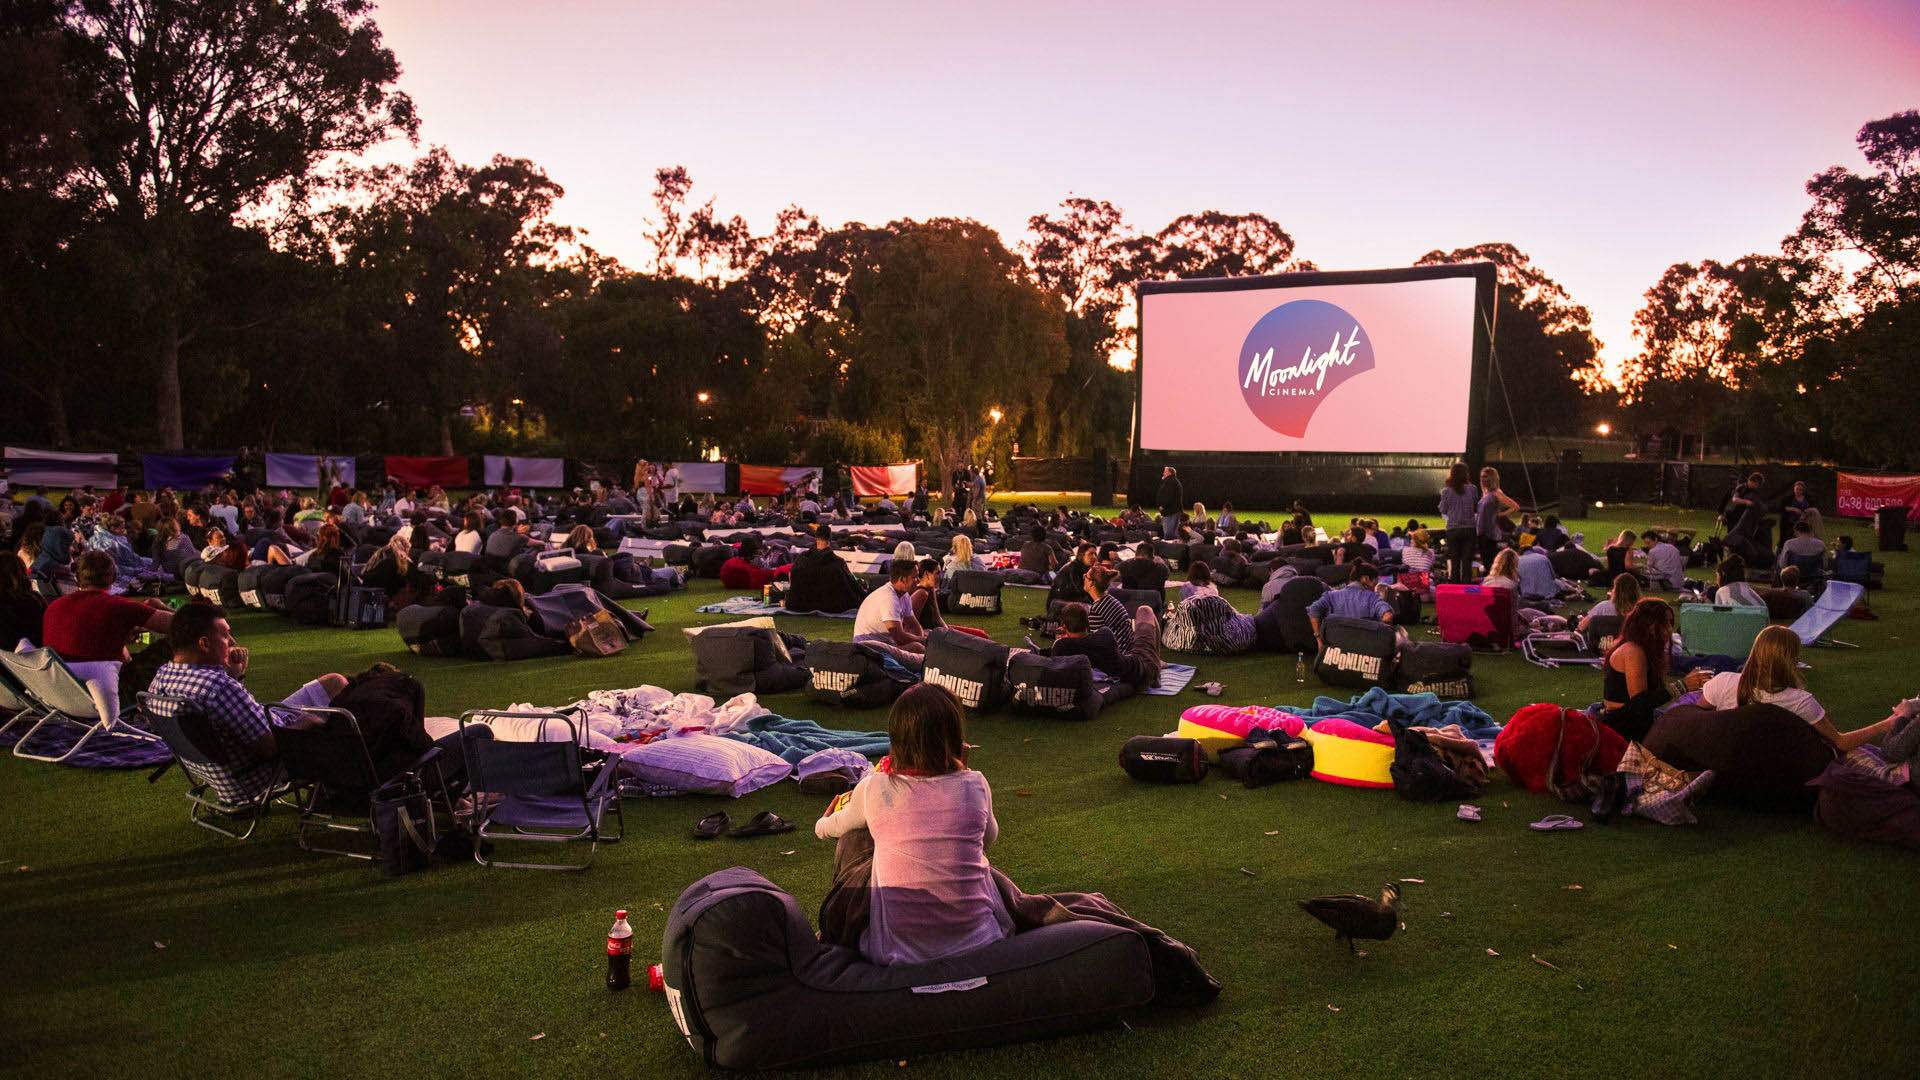 Moonlight Cinema Has Unveiled the Second Part of Its 2019 Summer Lineup